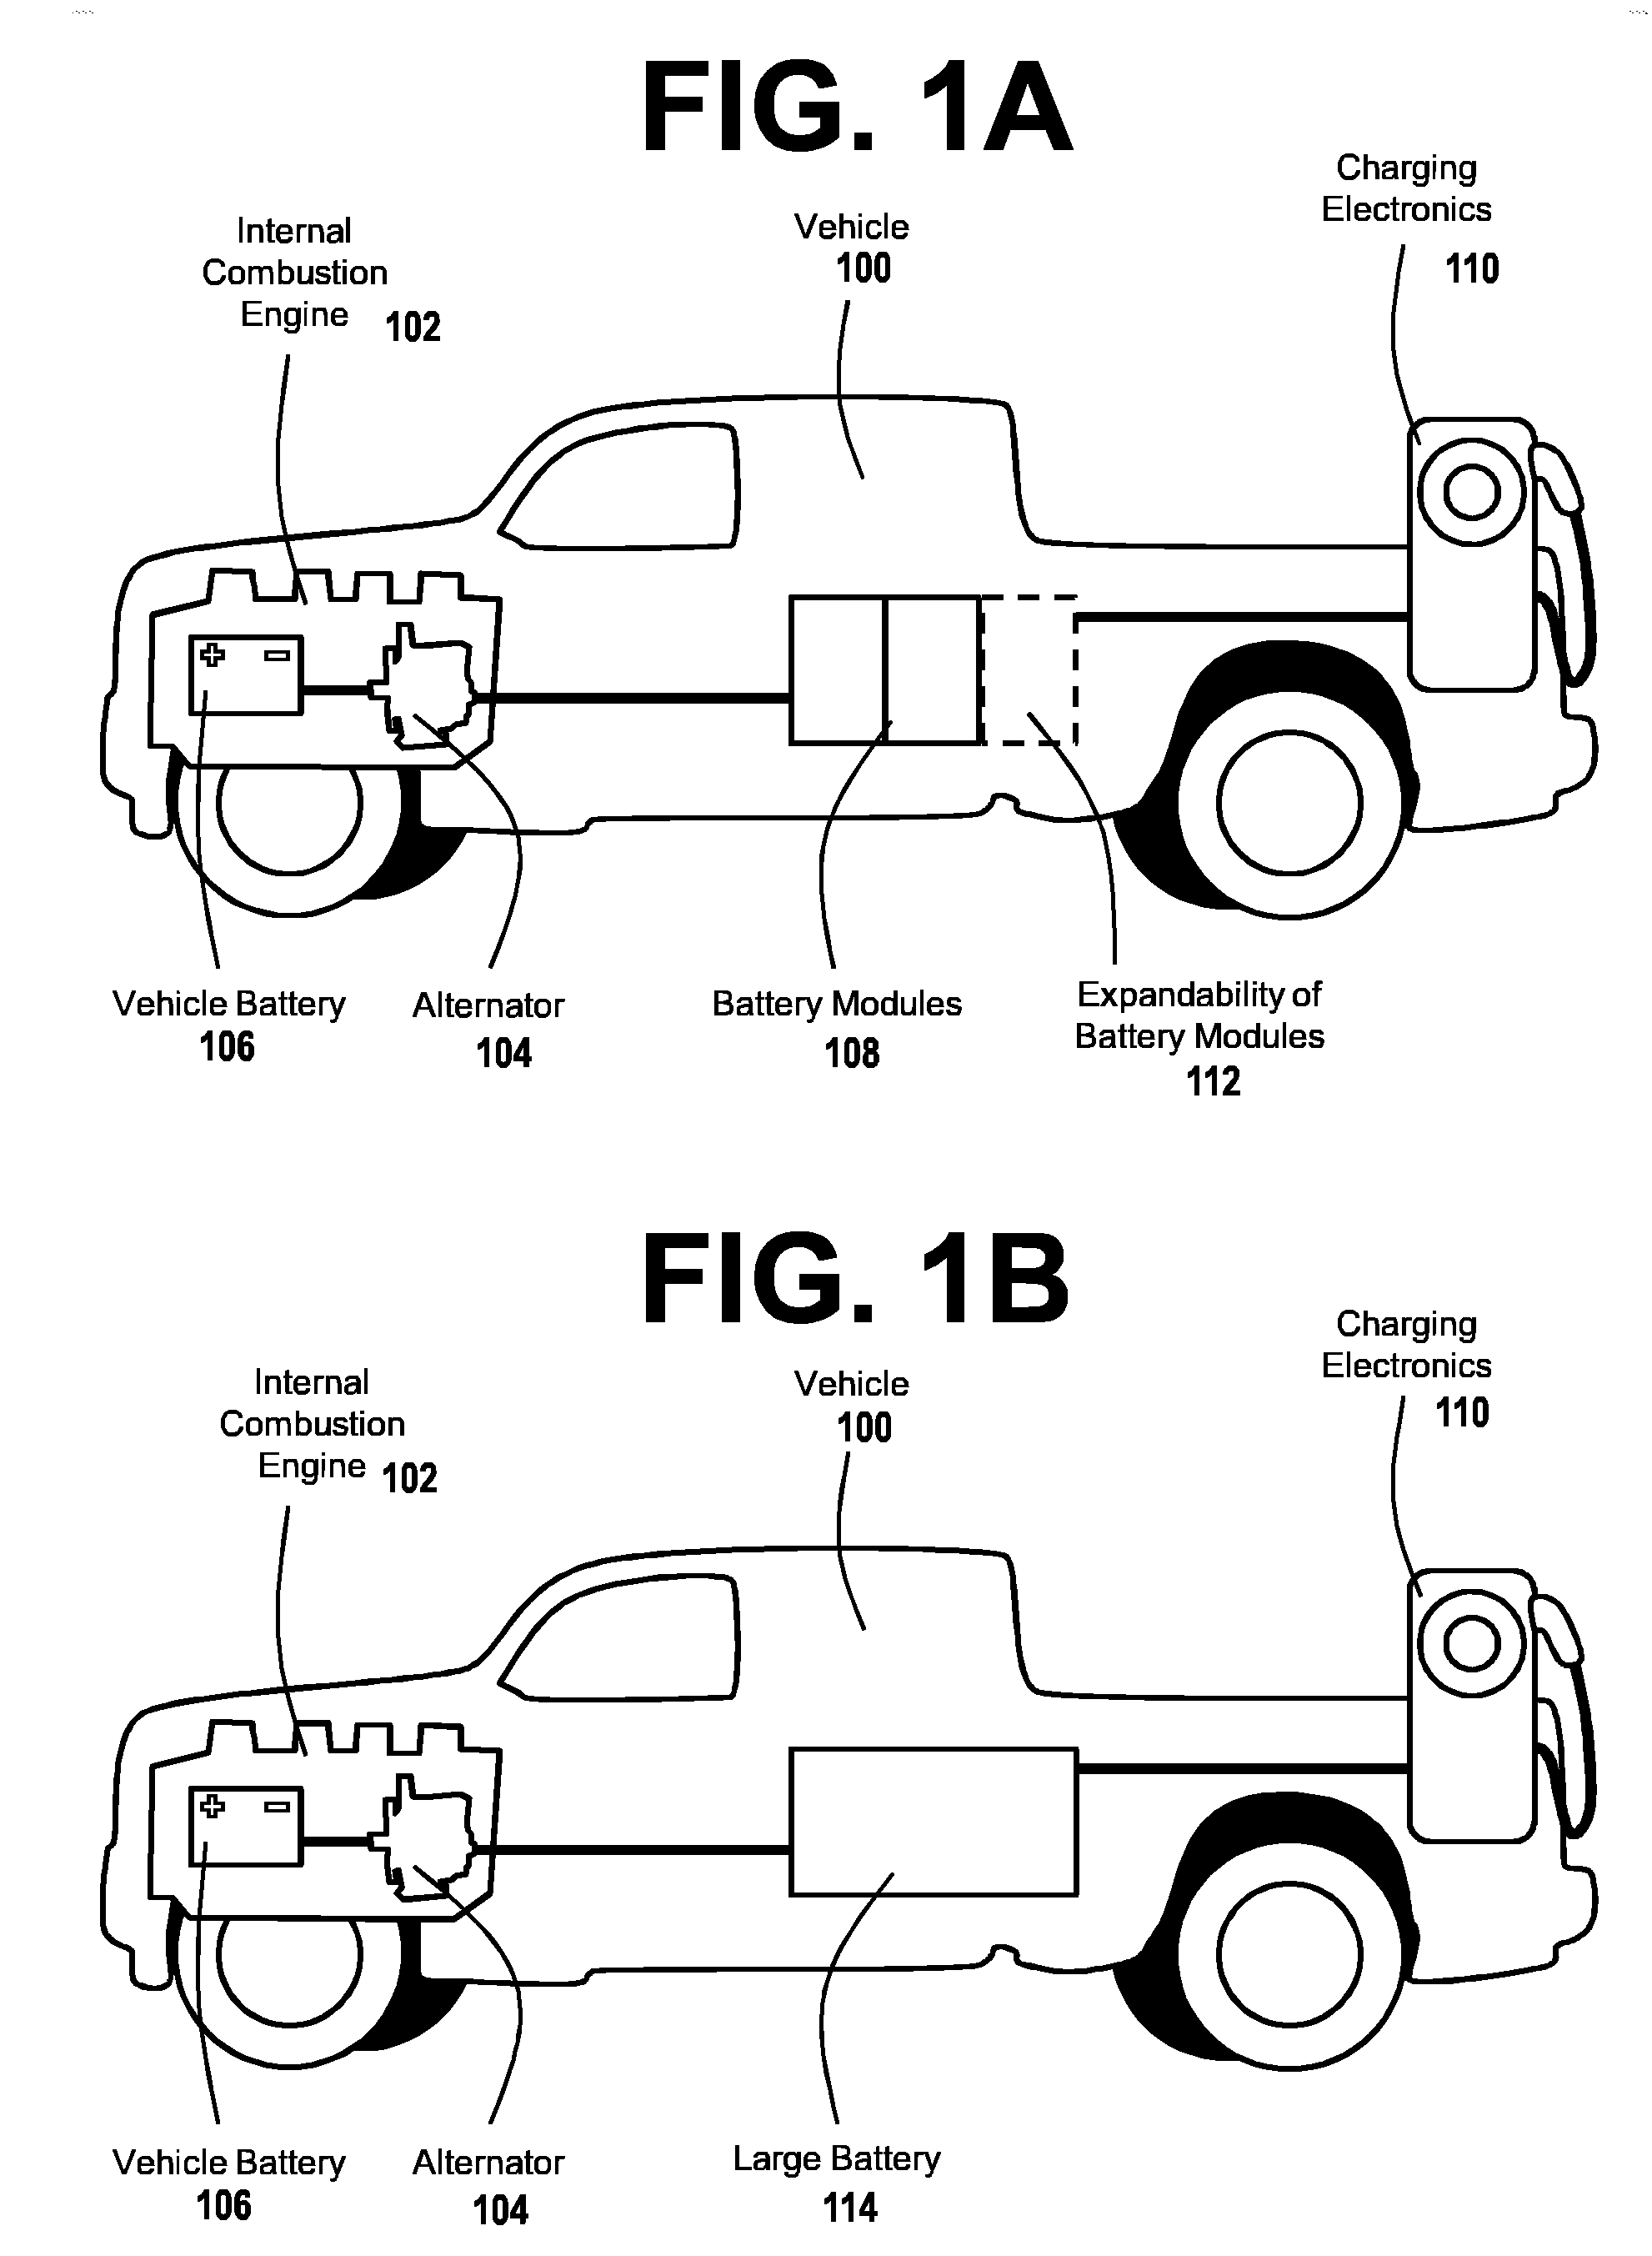 Charging Service Vehicles and Methods with Output Points and Cables